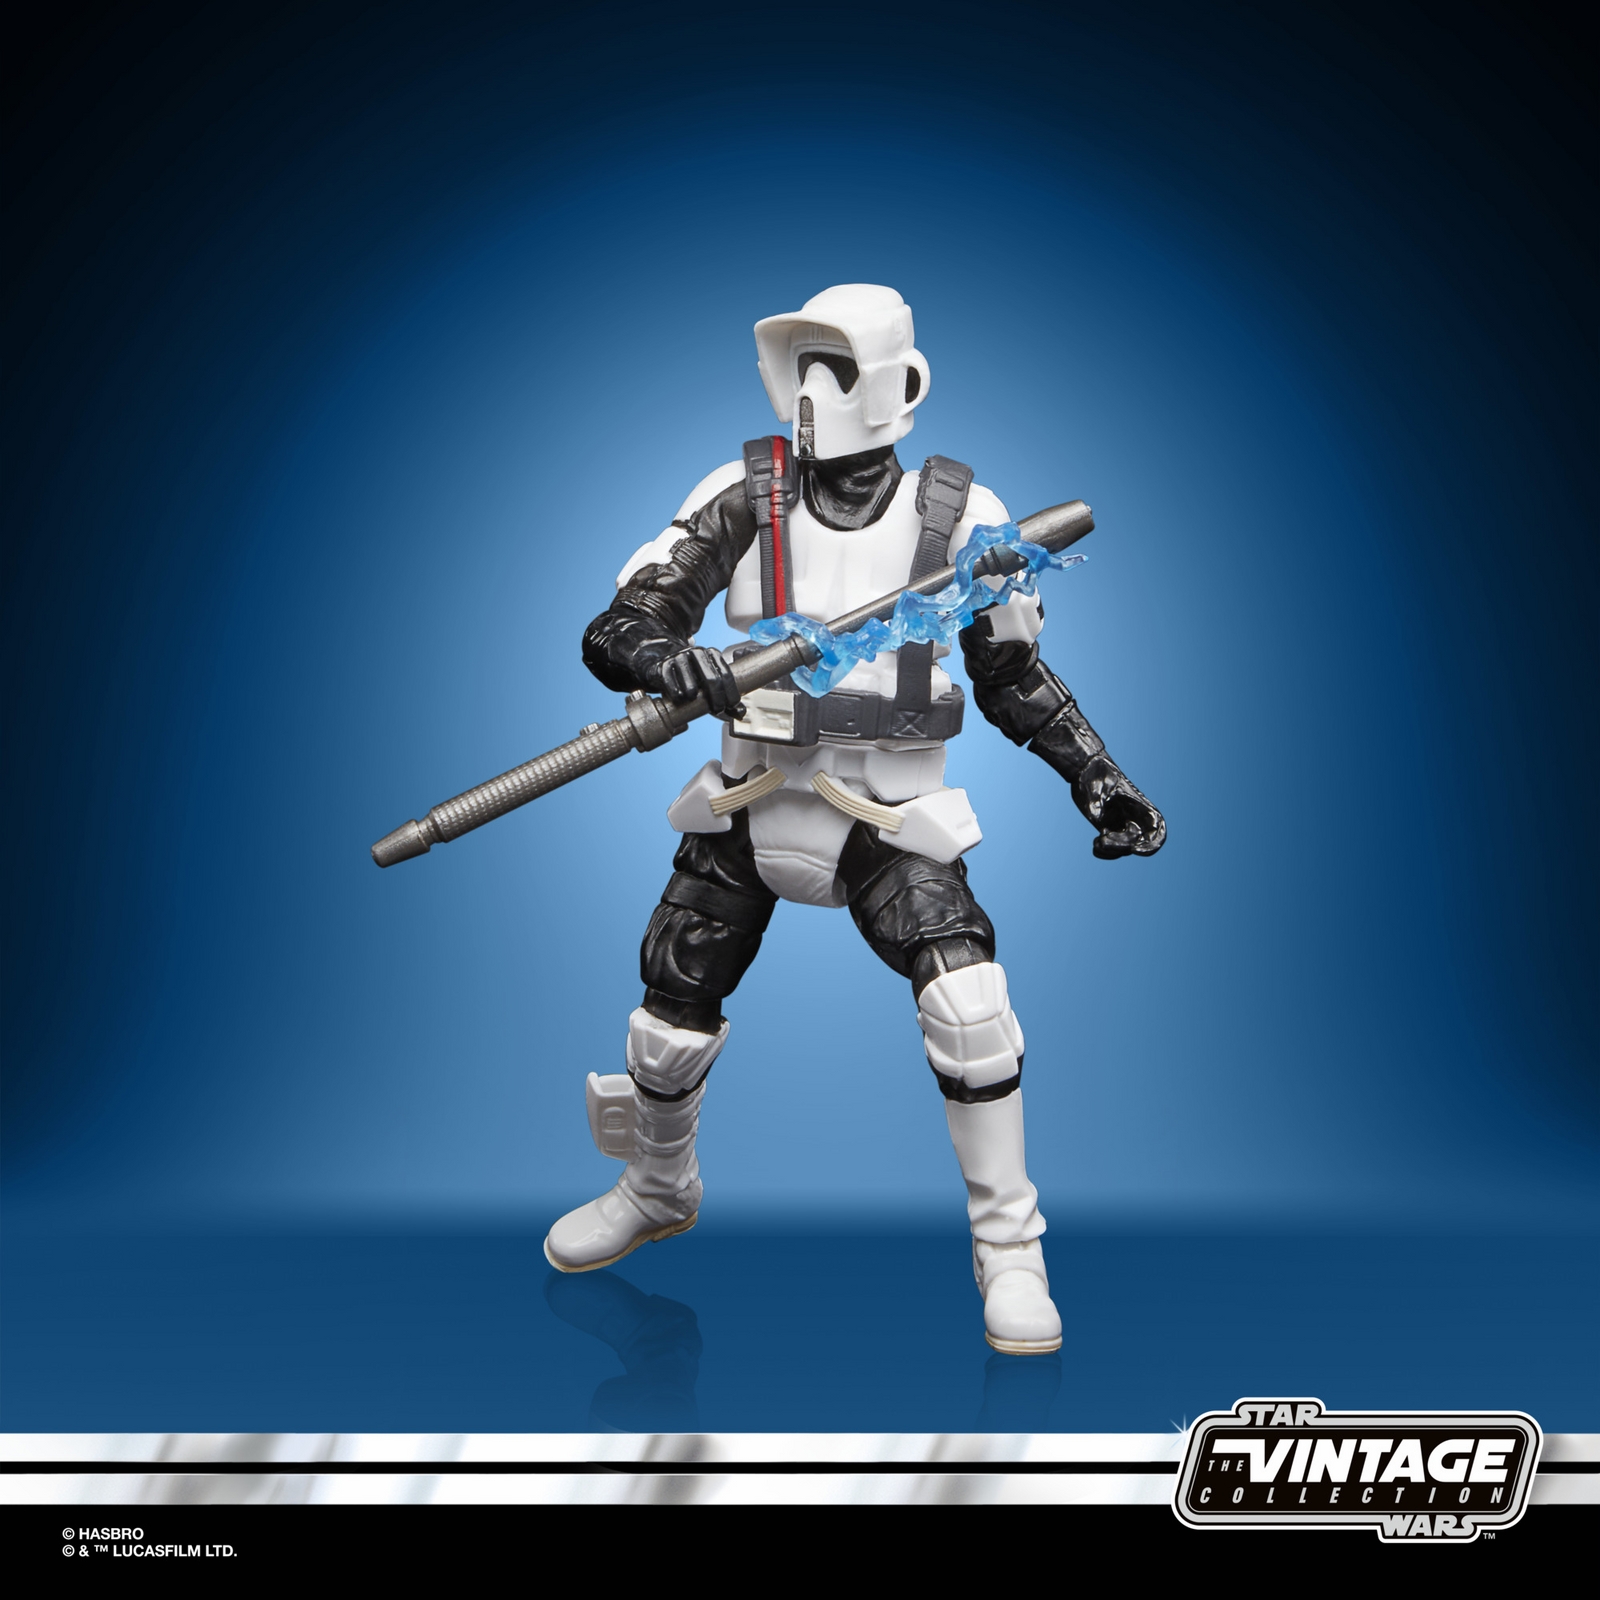 STAR WARS THE VINTAGE COLLECTION GAMING GREATS 3.75-INCH SHOCK SCOUT TROOPER Figure (4).jpg